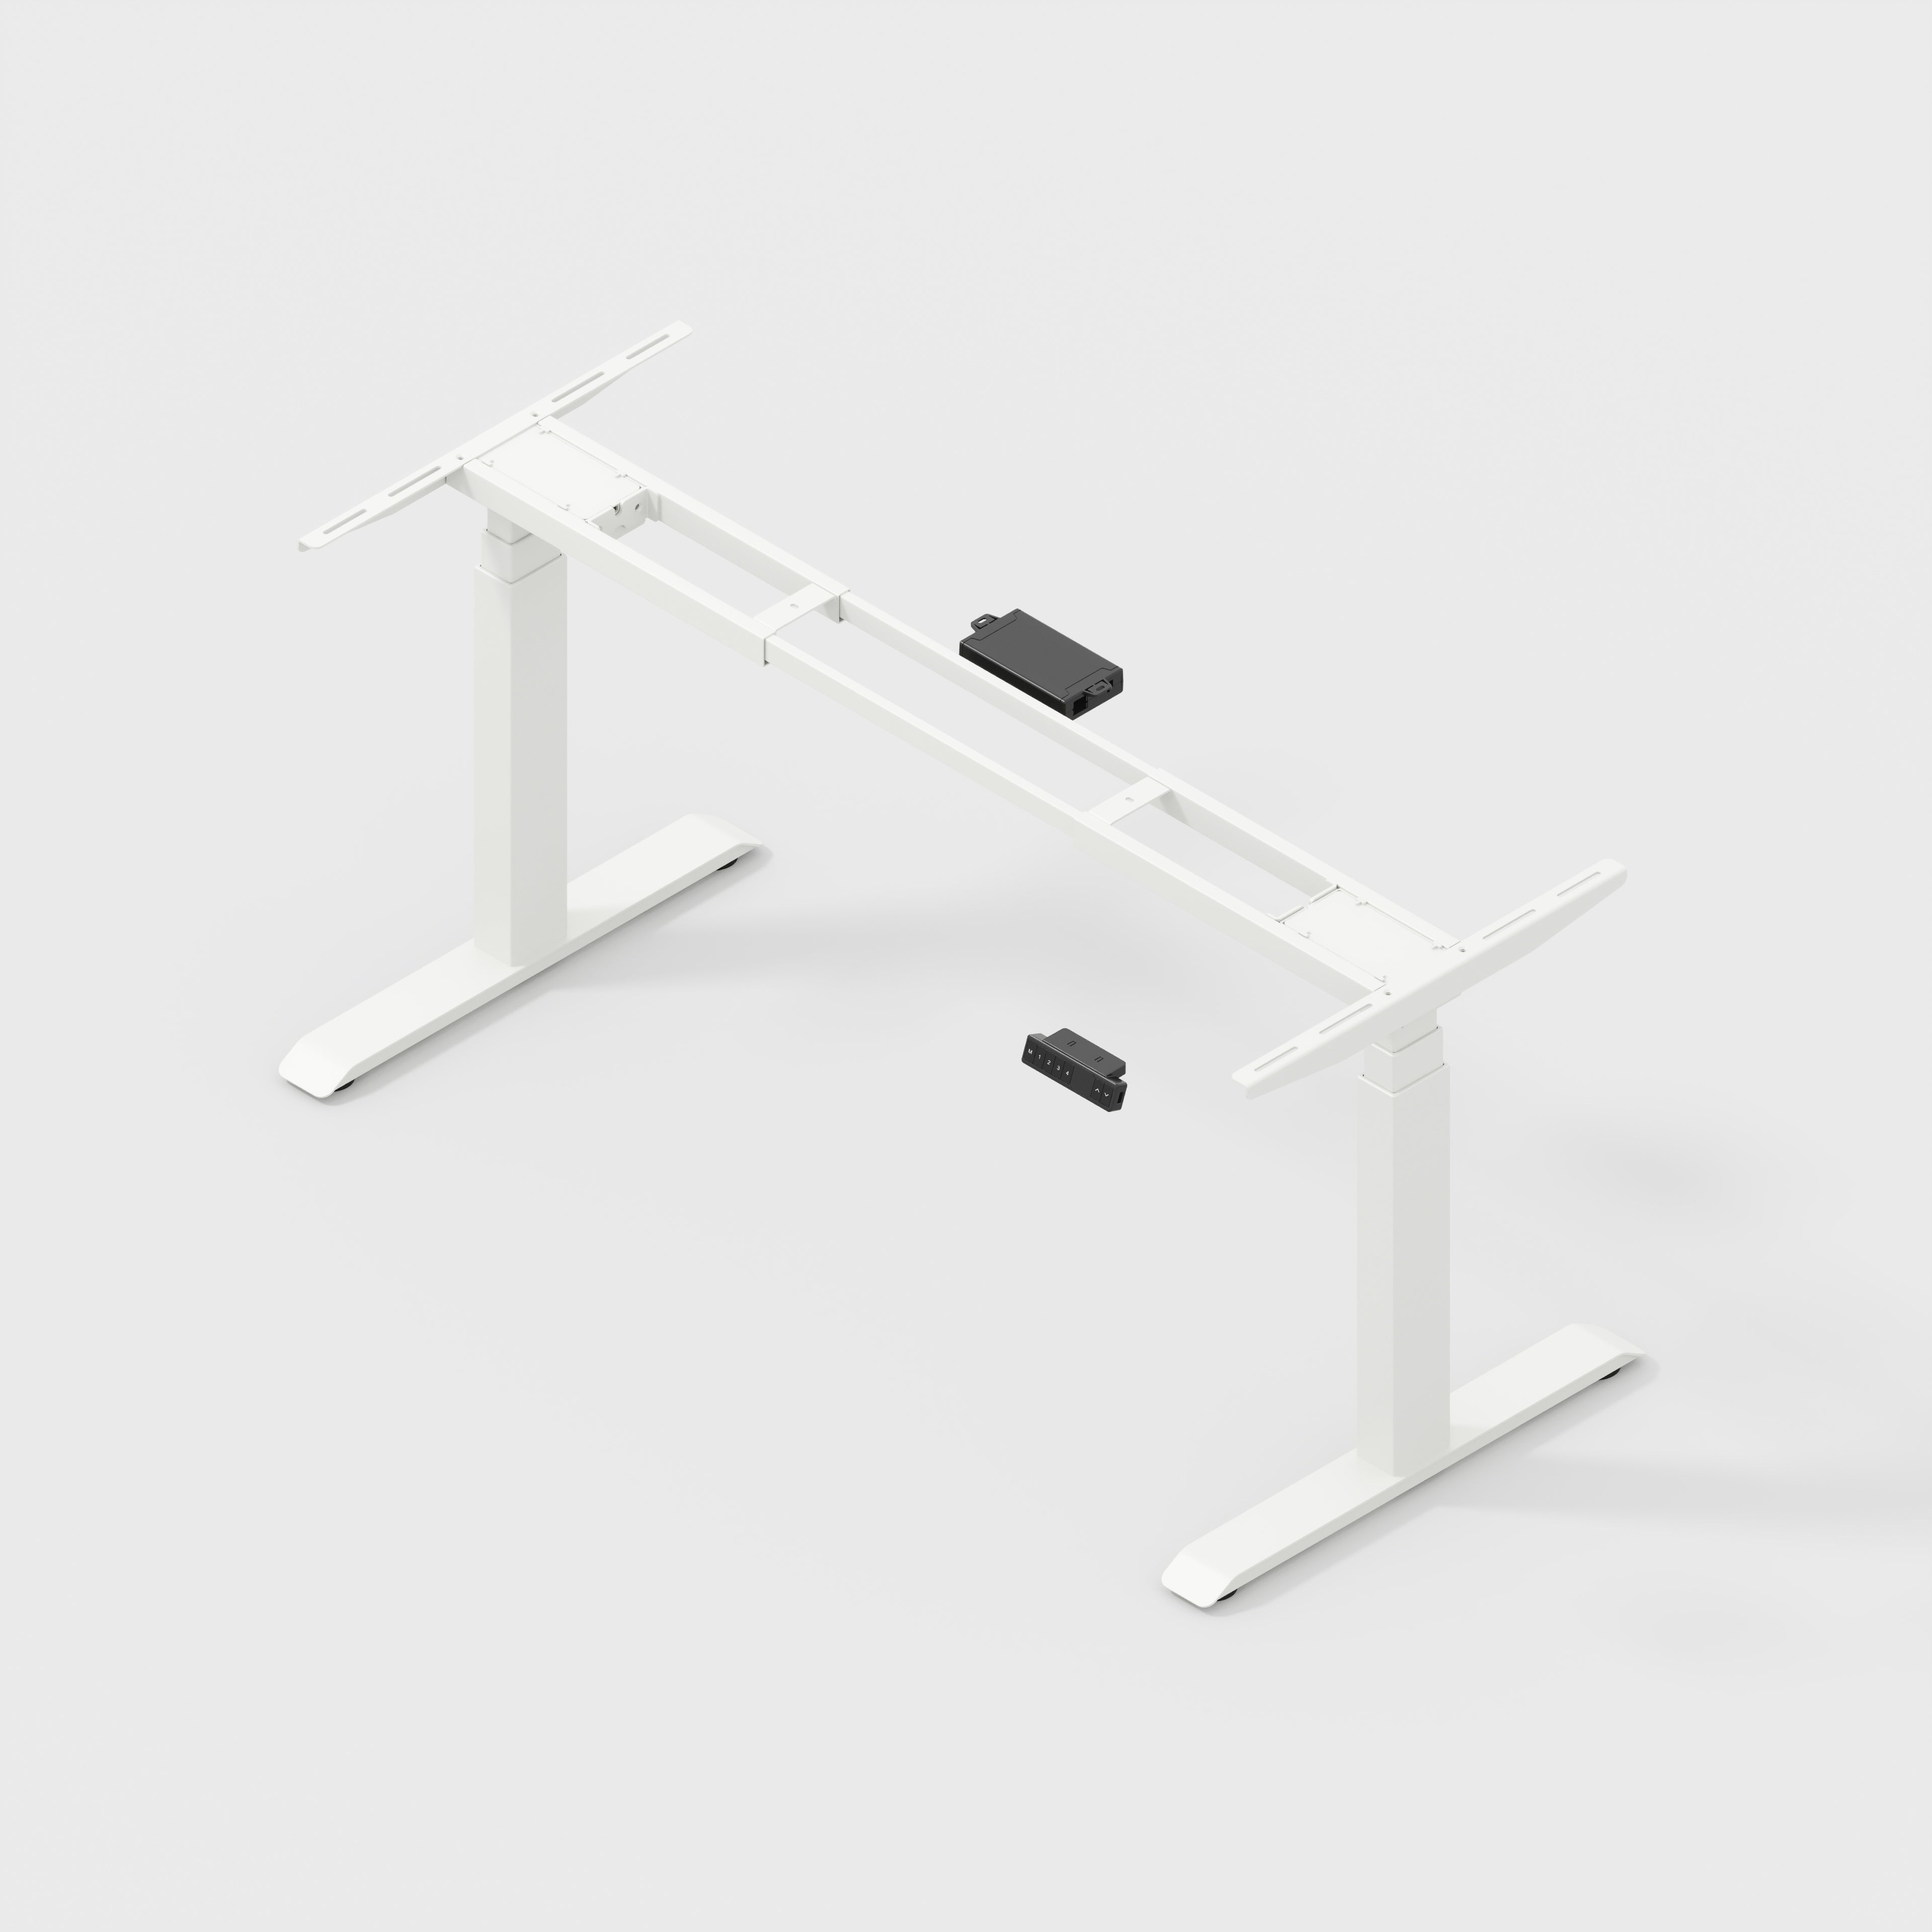 Desk/Table Legs - Sit-Stand Frame